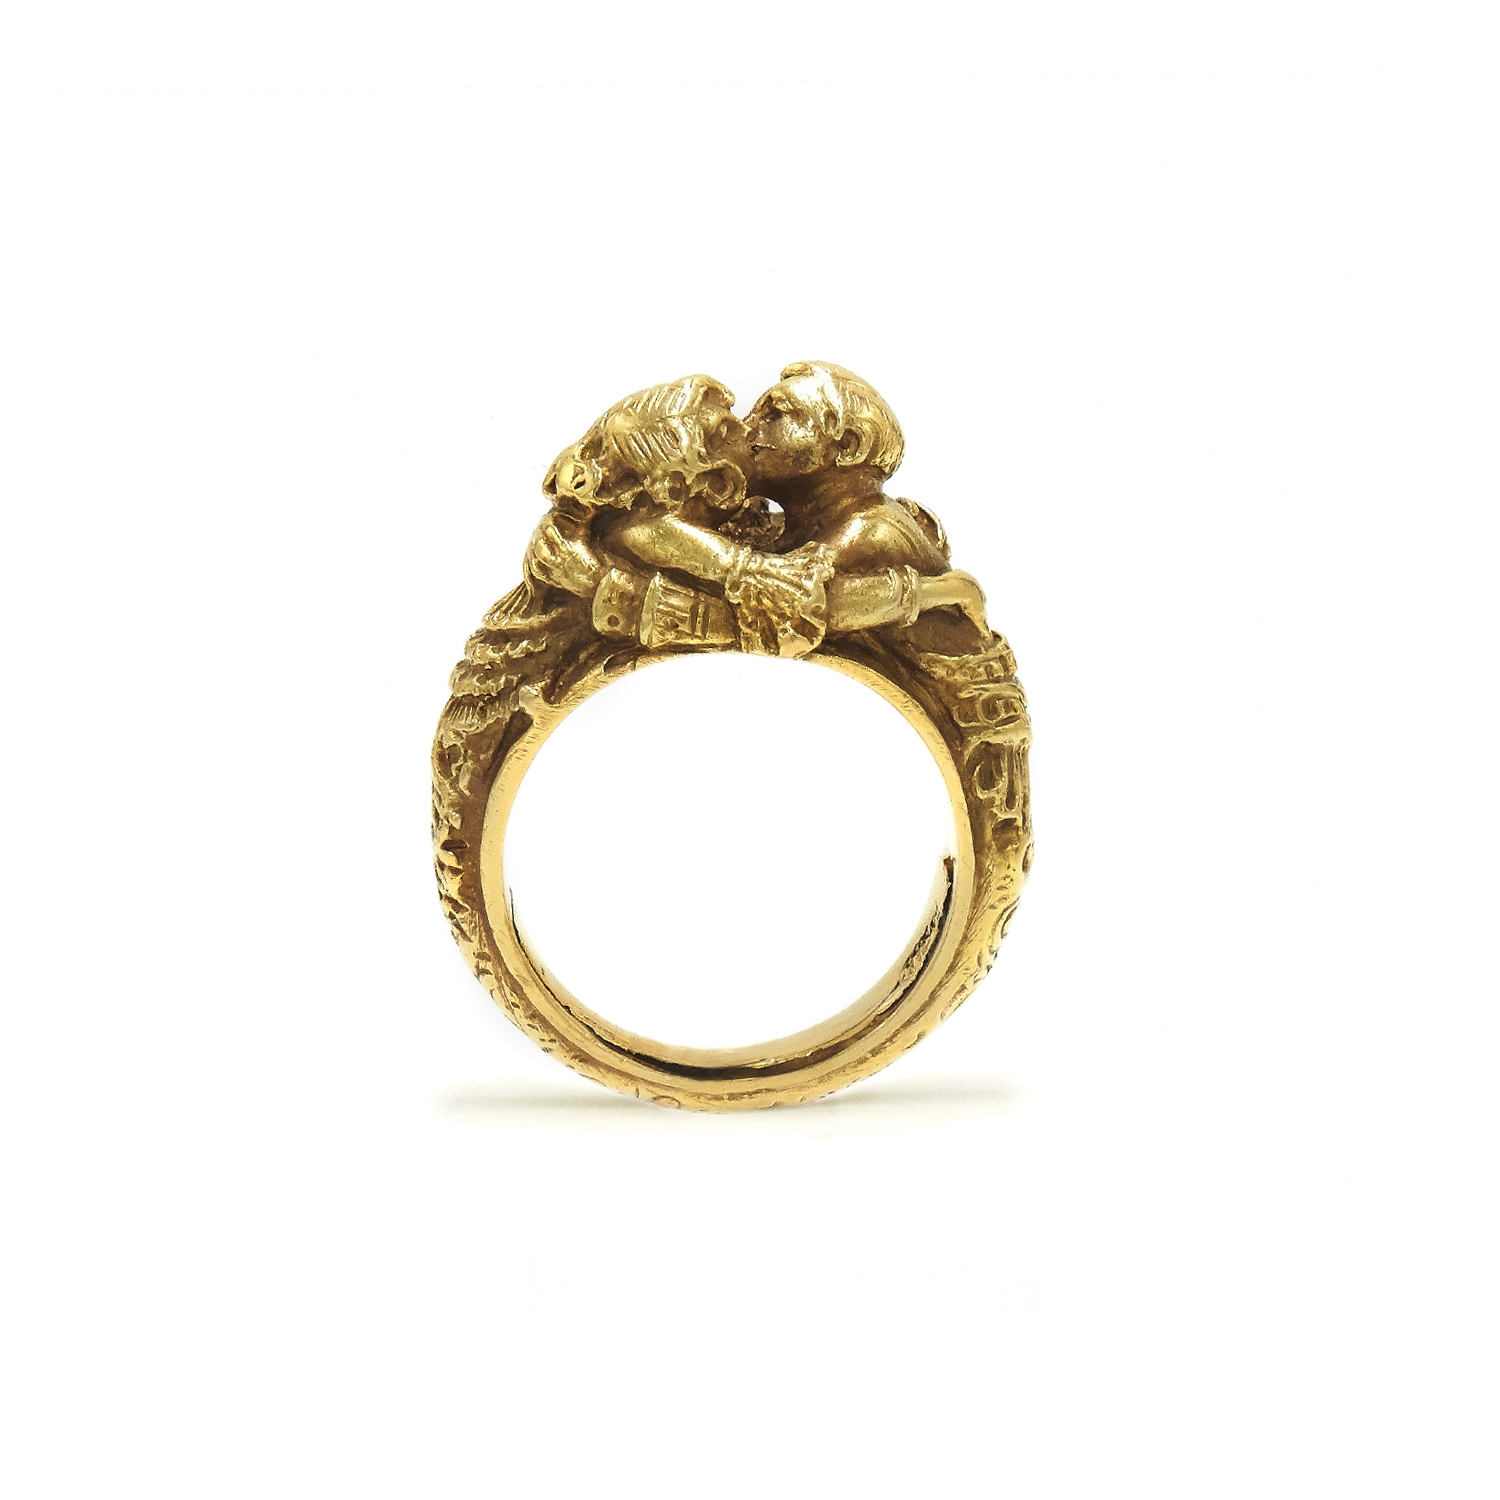 Antique 18K Yellow Gold Chased Lovers Embrace Ring Style R-24185-FL-0-0